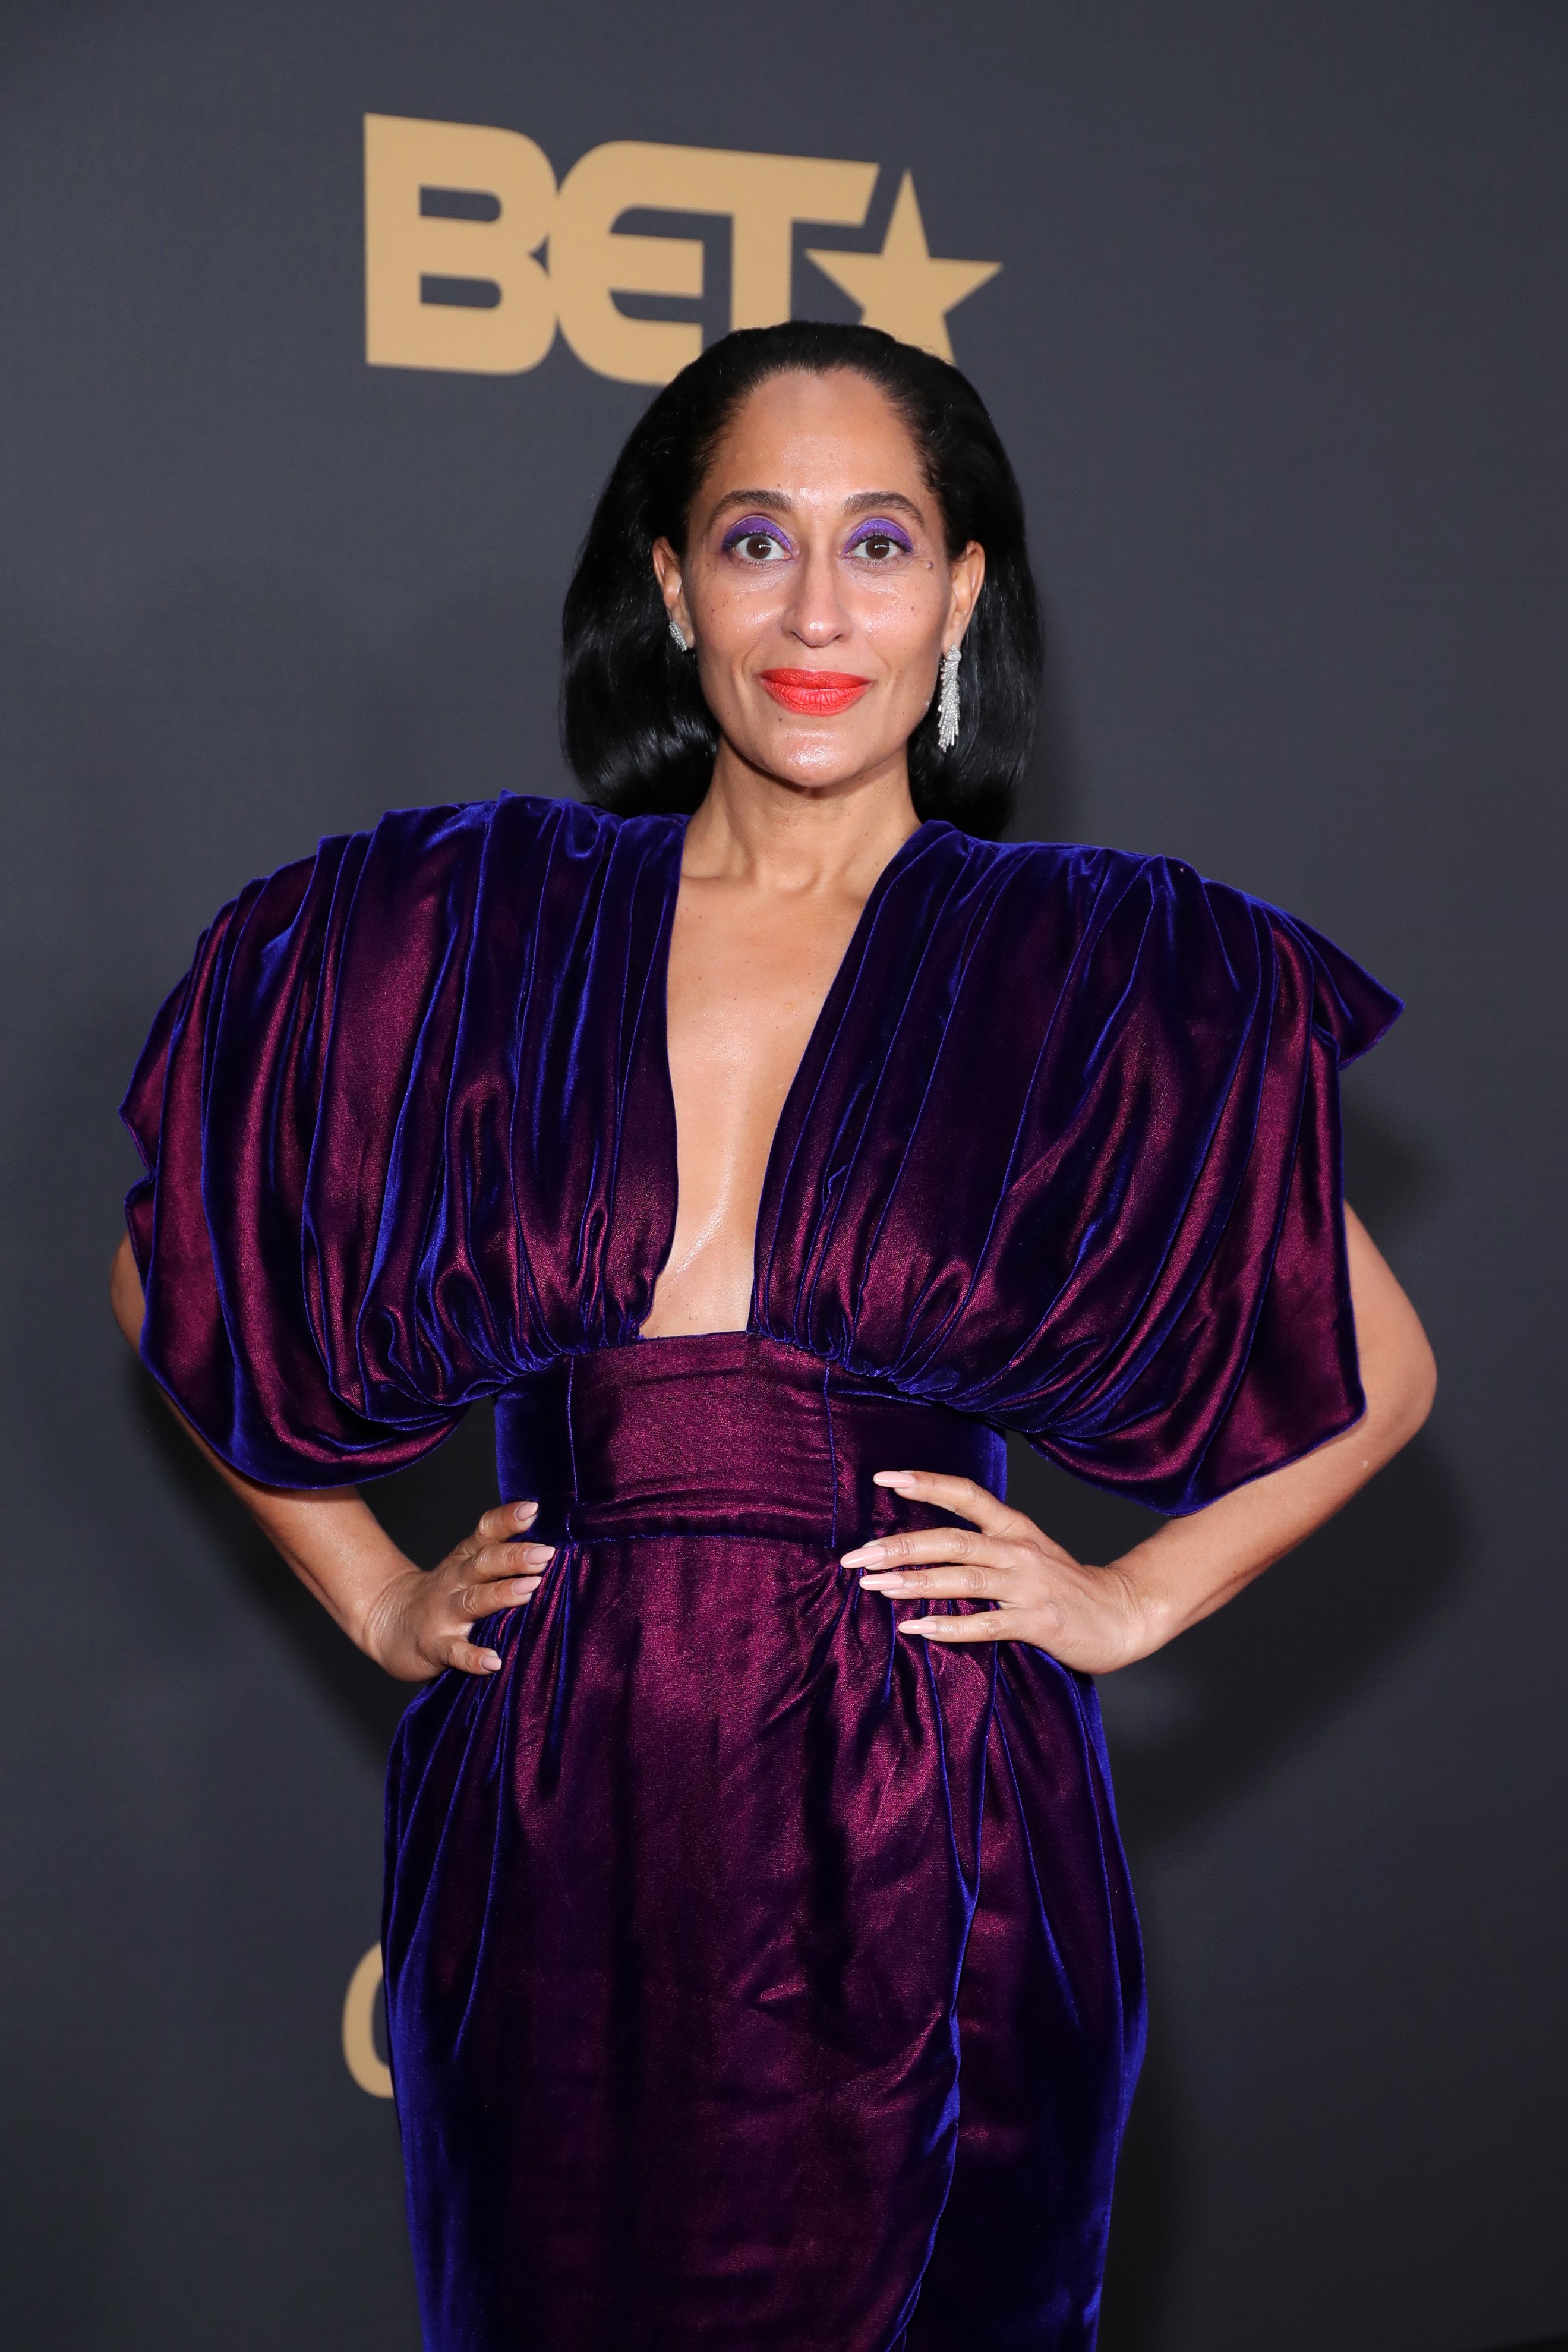 Tracee Ellis Ross arrives at the 51st NAACP Image Awards presented by BET on February 22, 2020 in Pasadena, California. | Photo: Getty Image